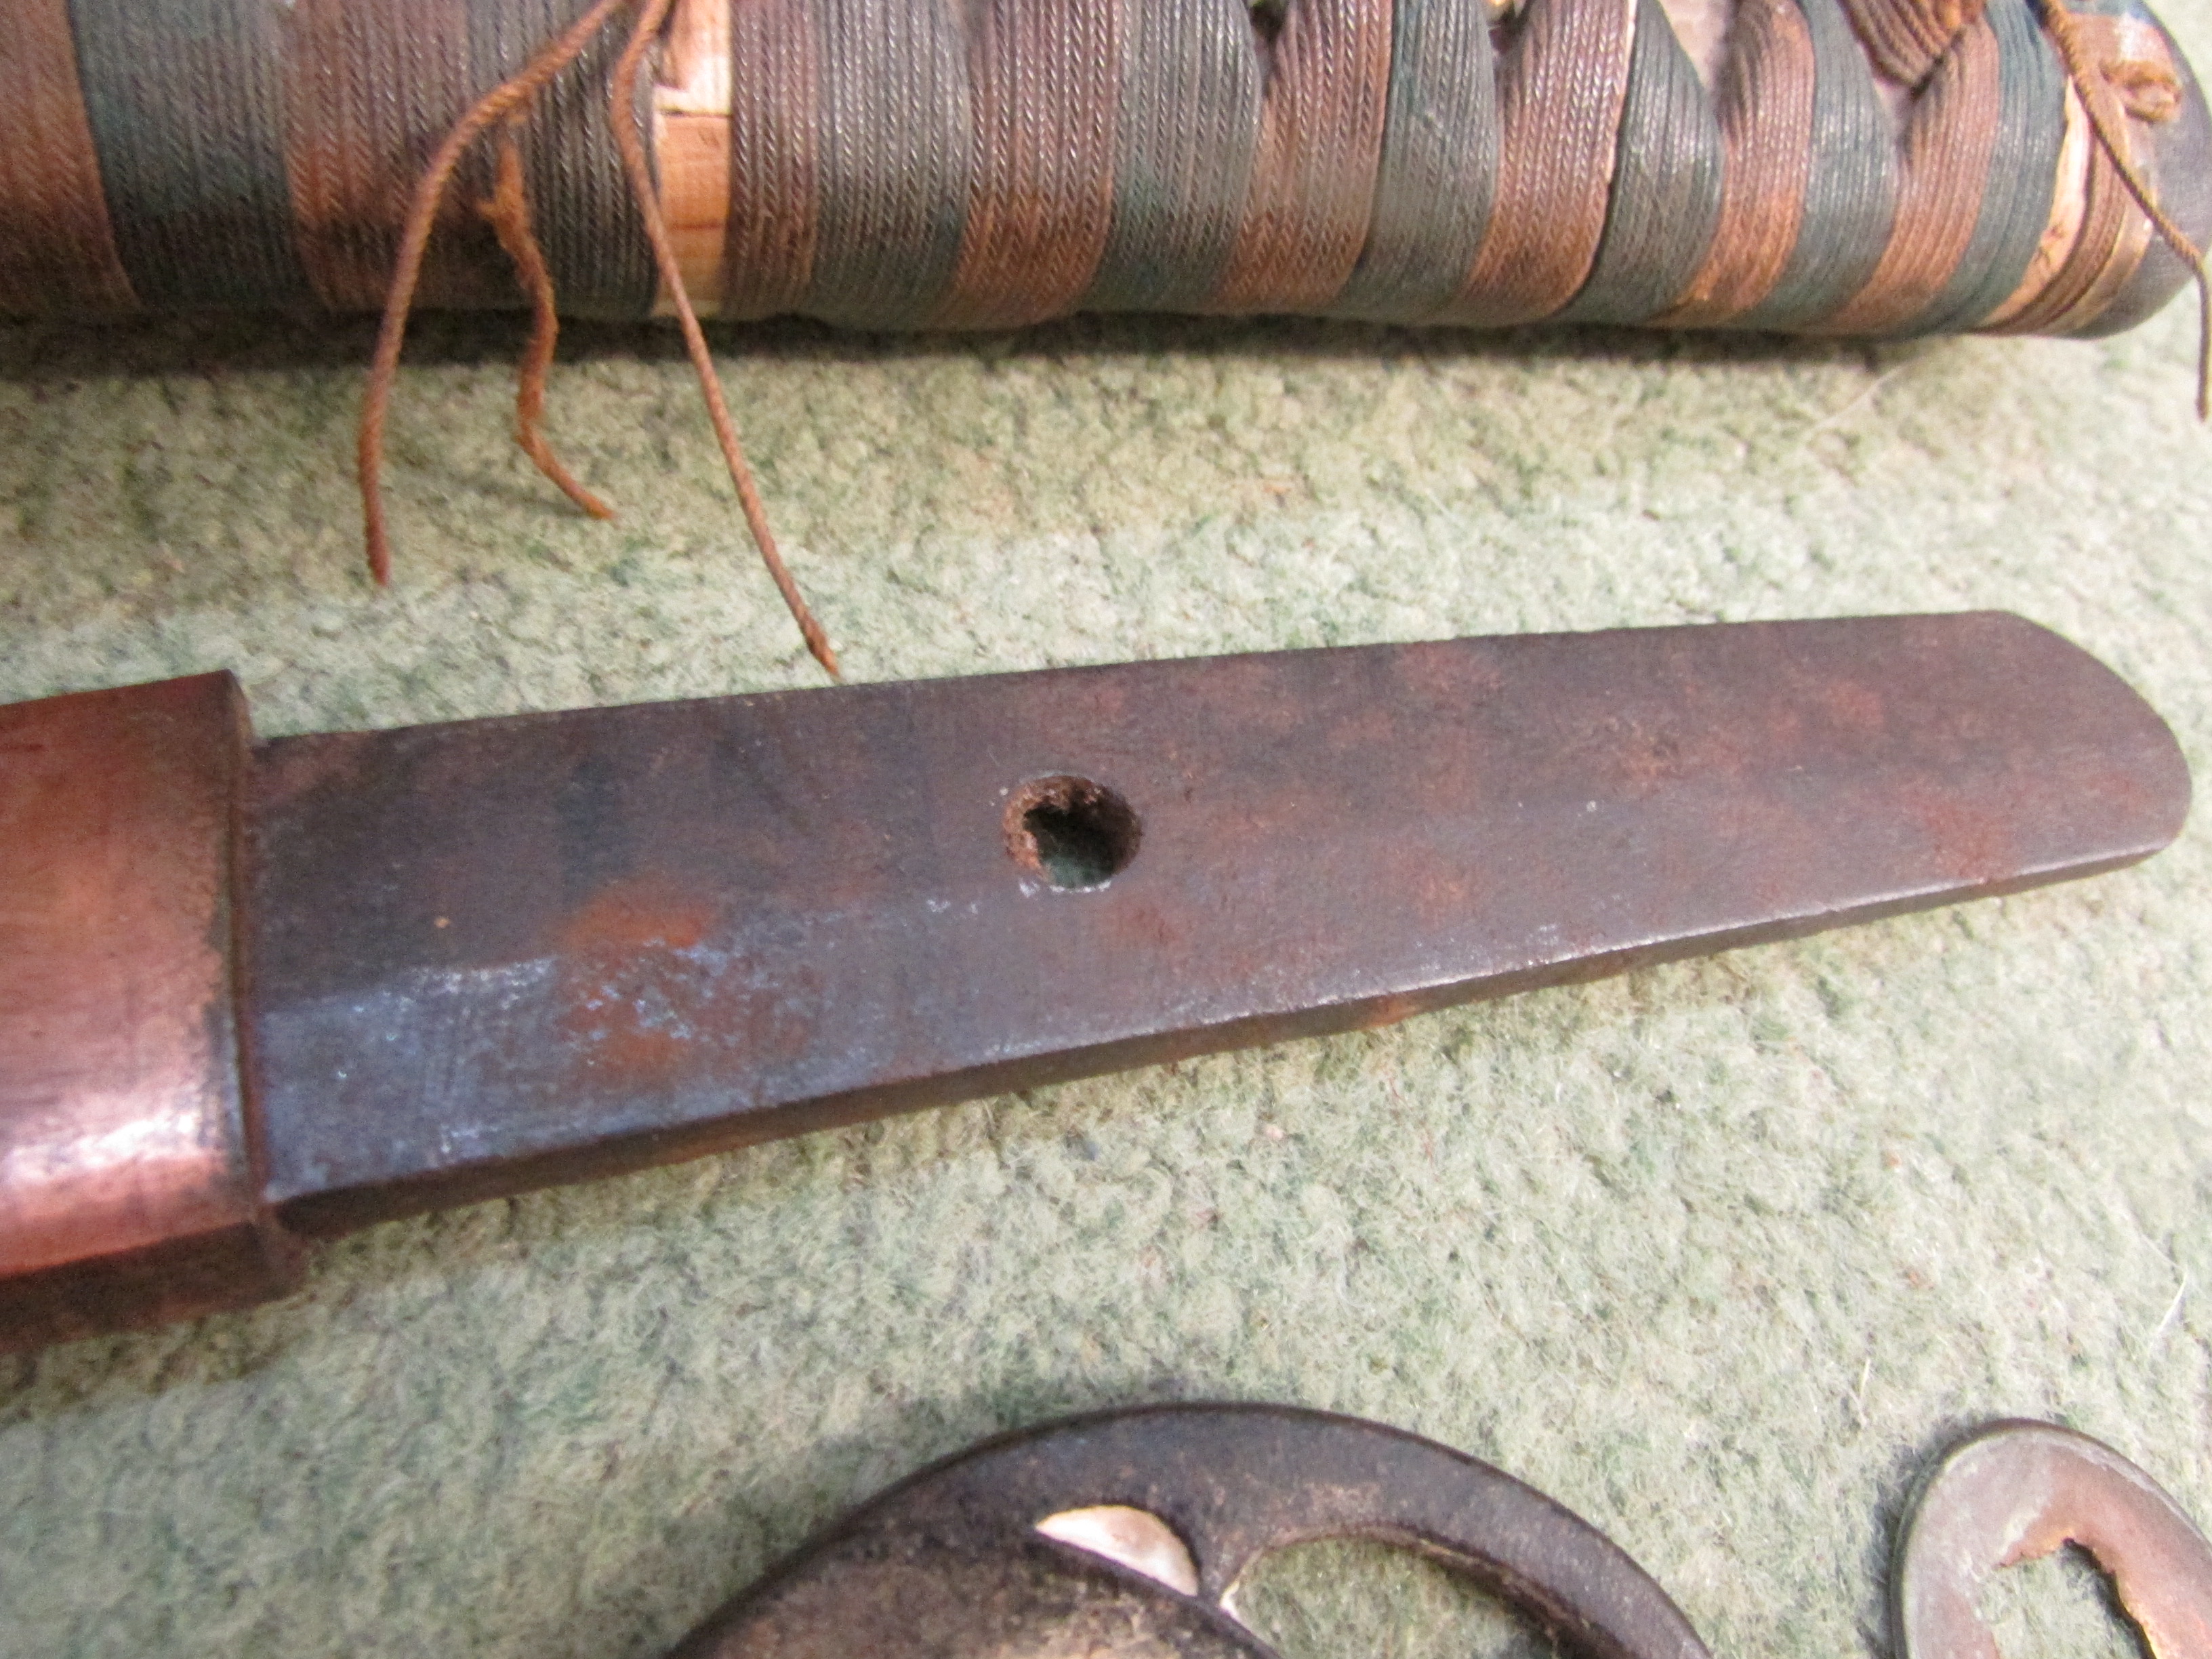 AN ANTIQUE JAPANESE KATANA SWORD WITH SHEATH, SOLD AS FOUND - Image 33 of 35